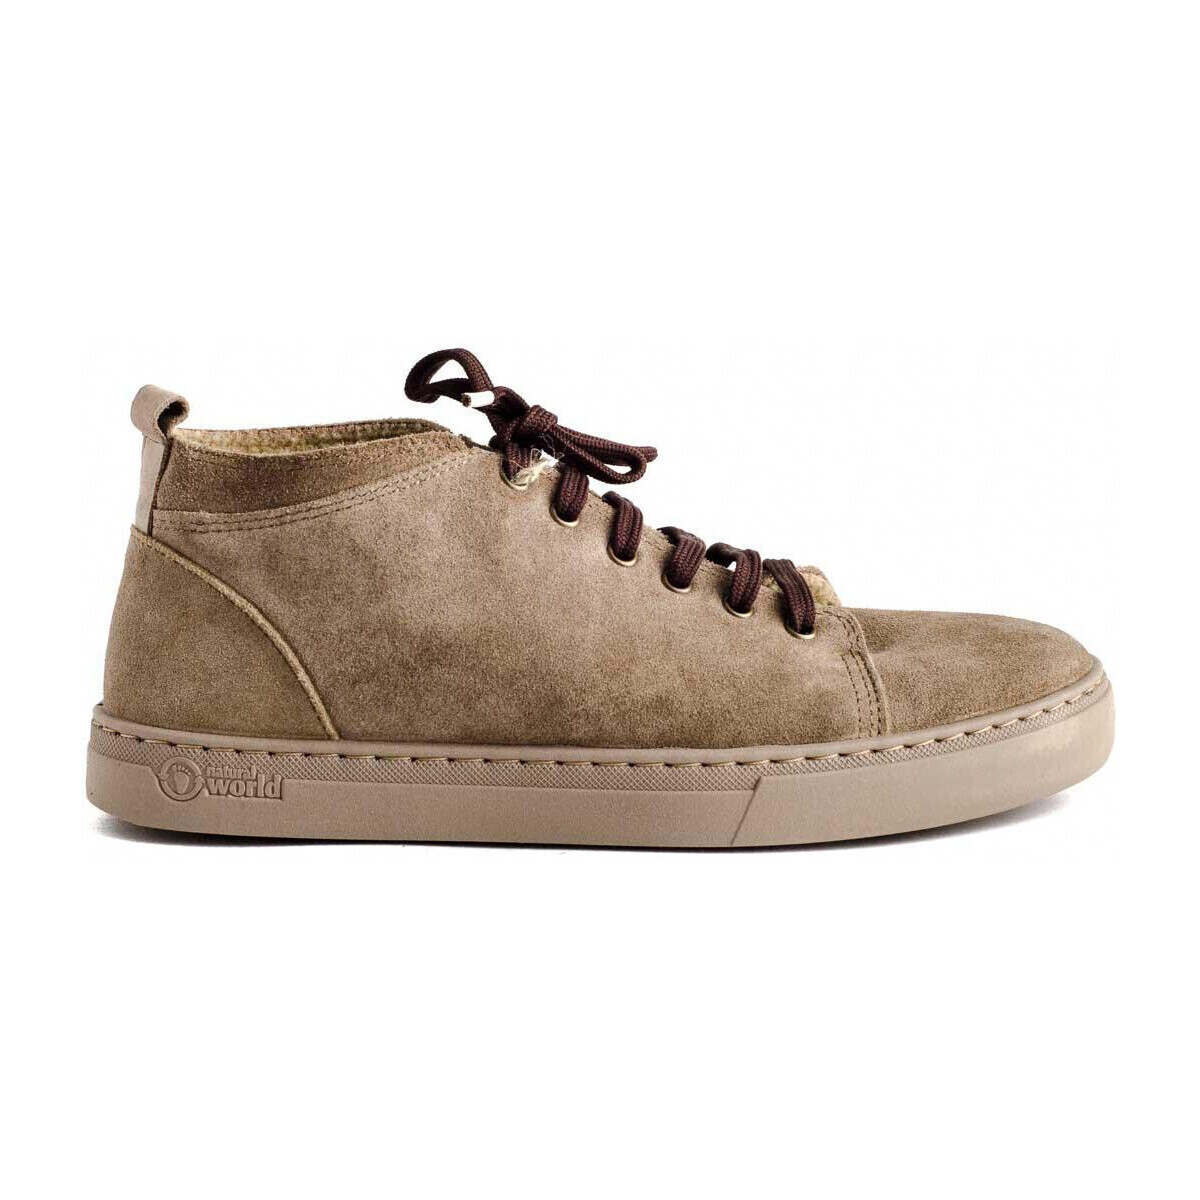 Chaussures Homme Boots Natural World 6721 Beige